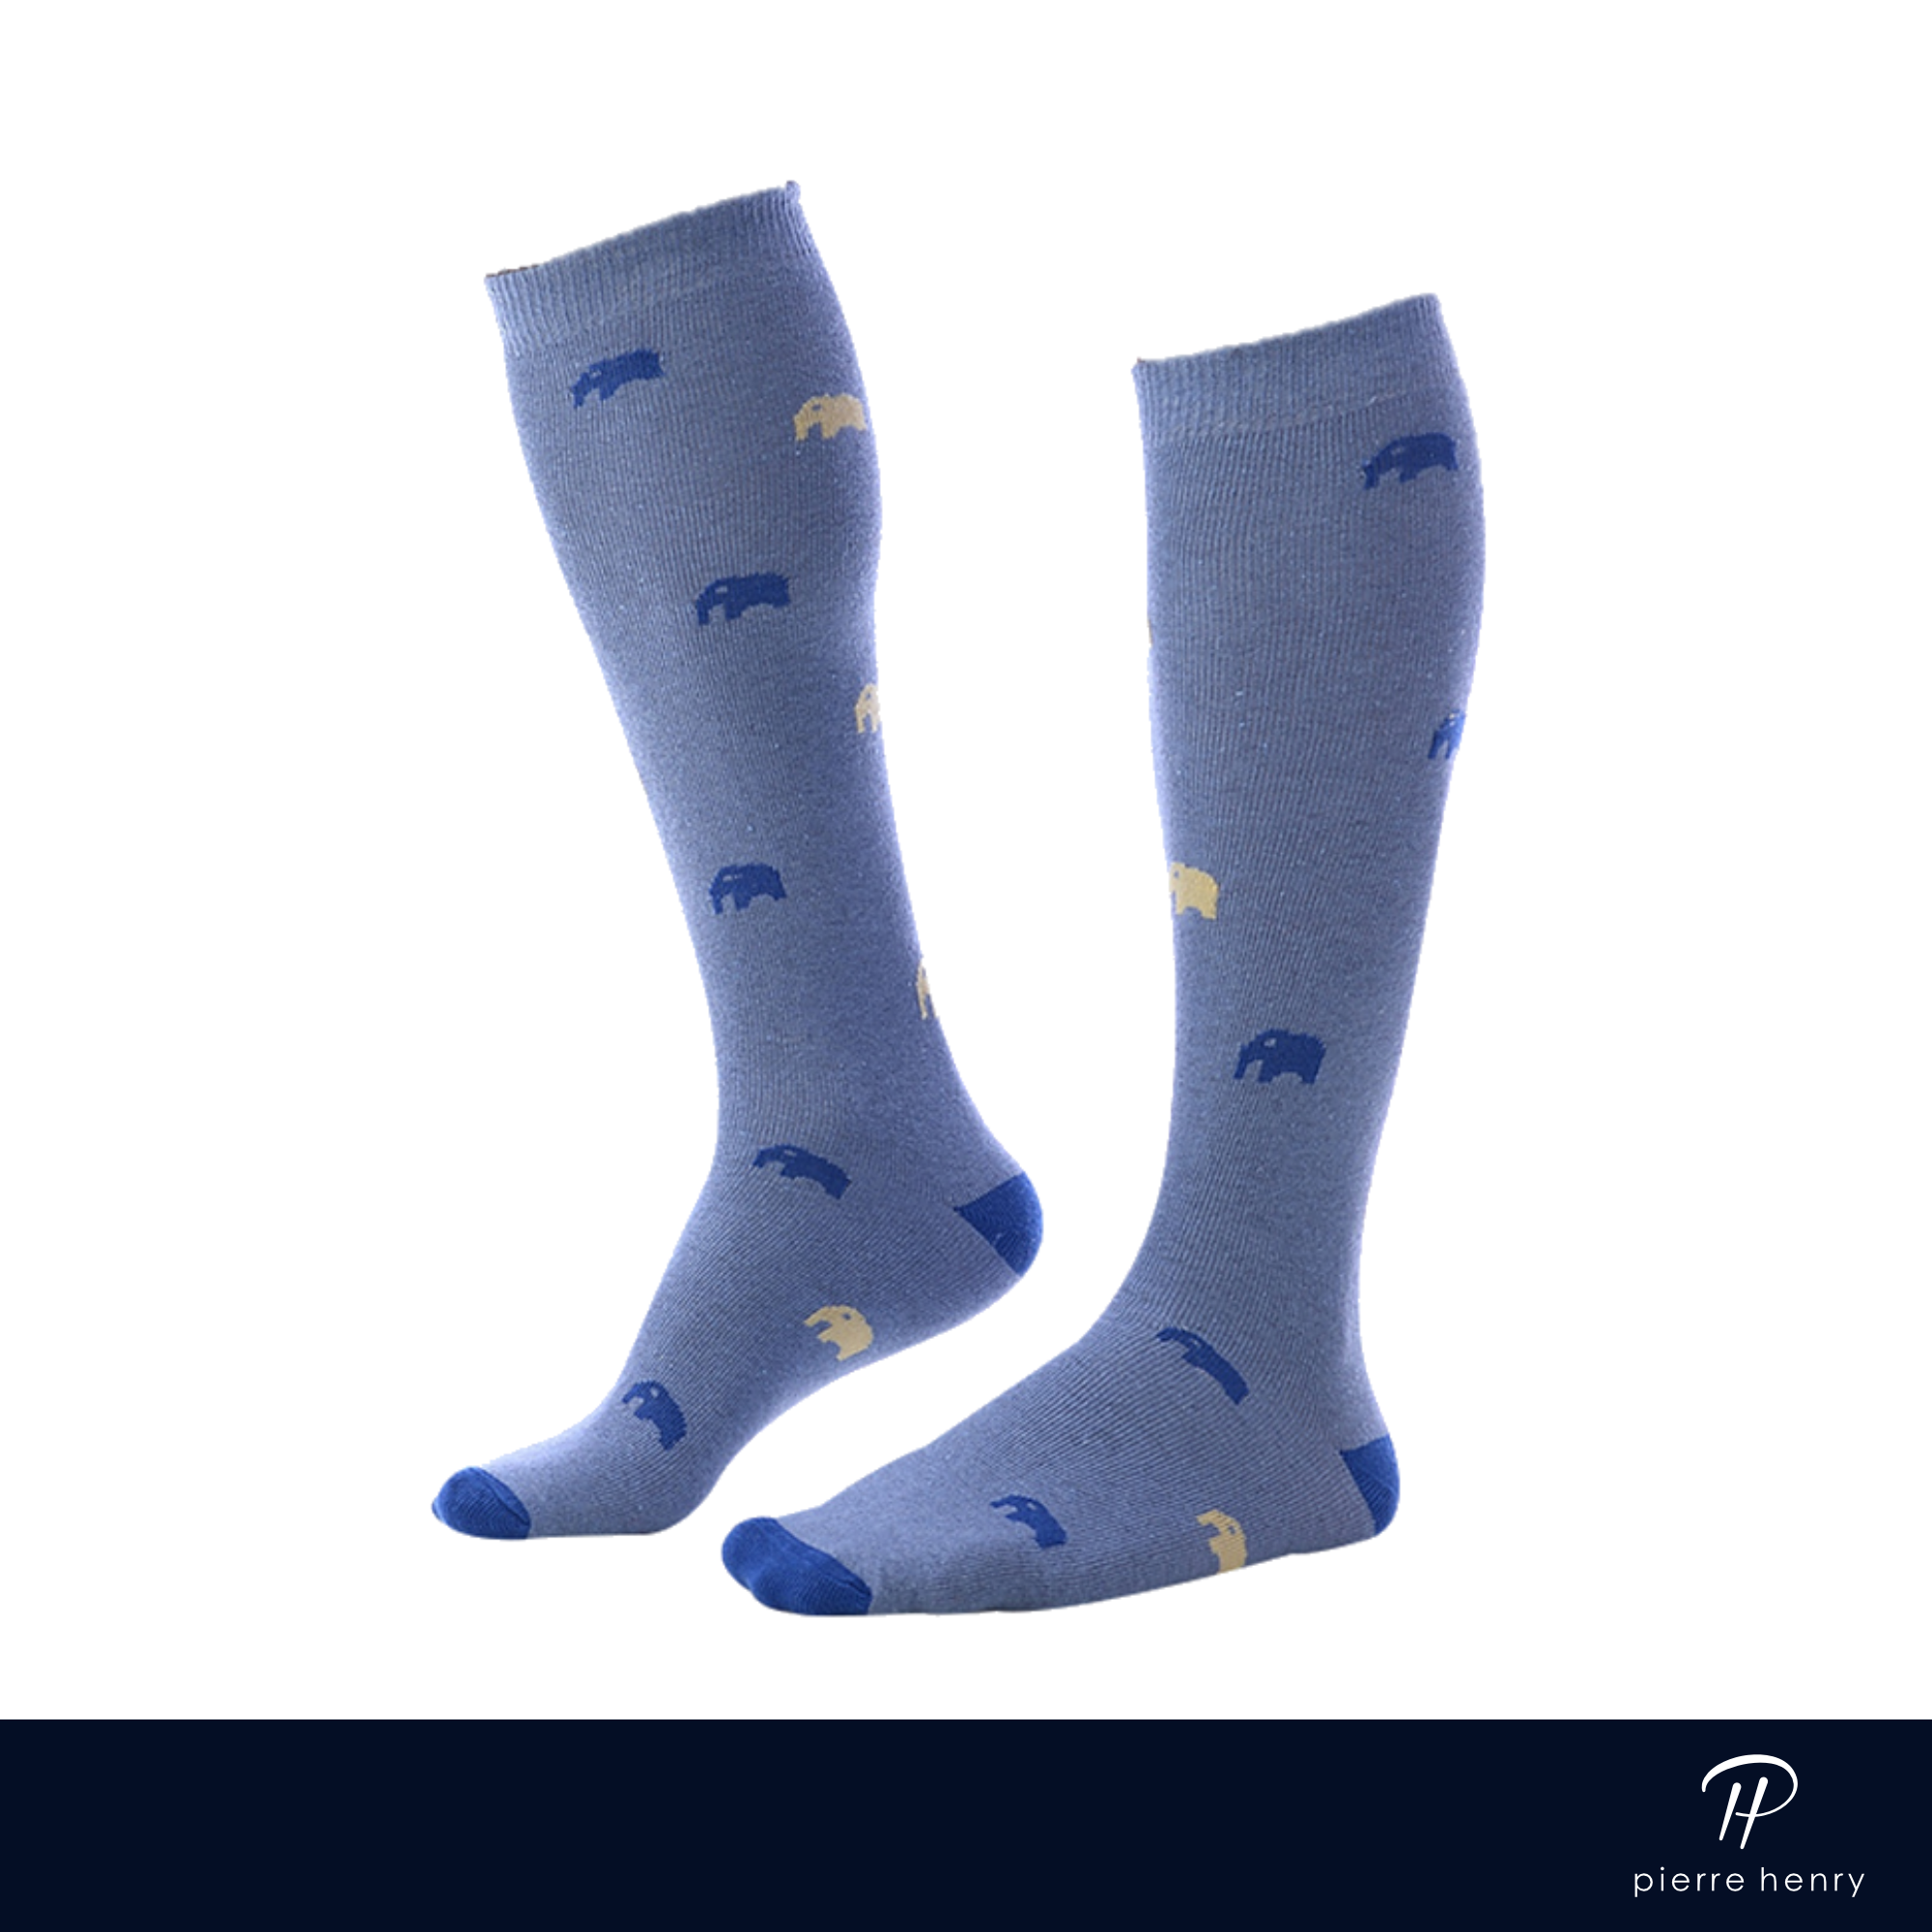 blue over the calf dress socks with blue toe and heel and blue and beige elephant prints